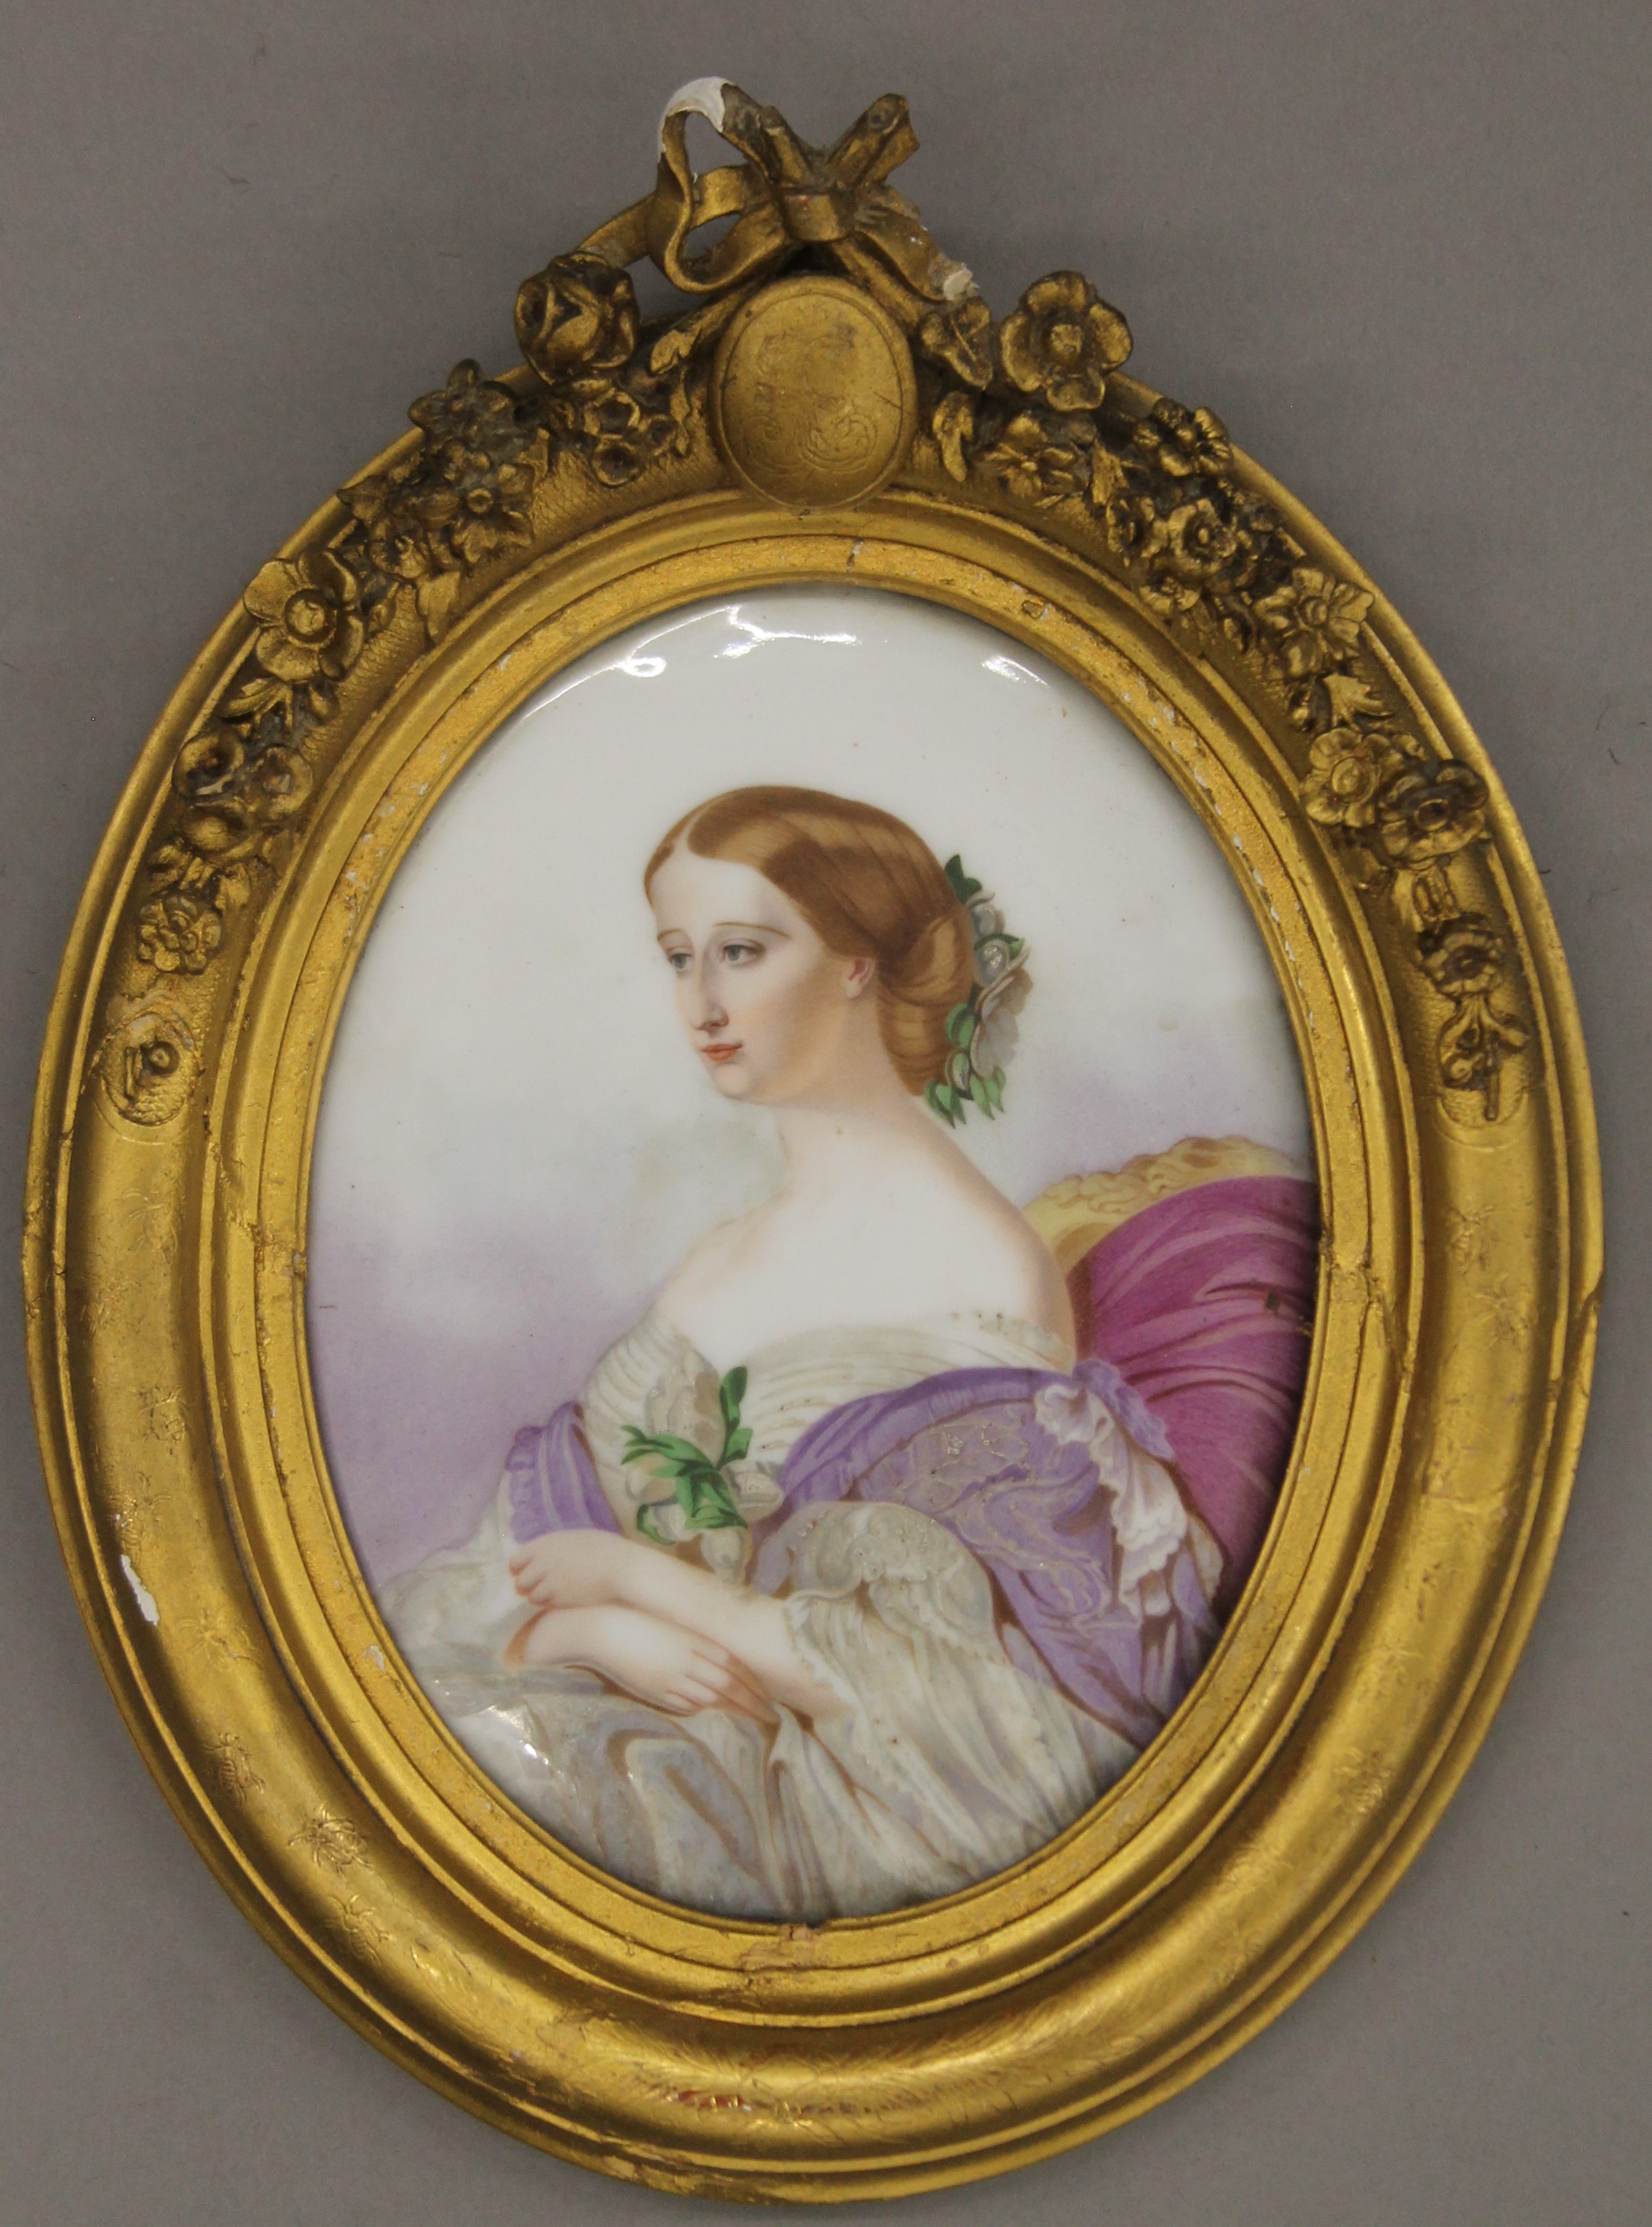 A 19th century Continental plaque painted with a seated lady, housed in an oval gilt frame.